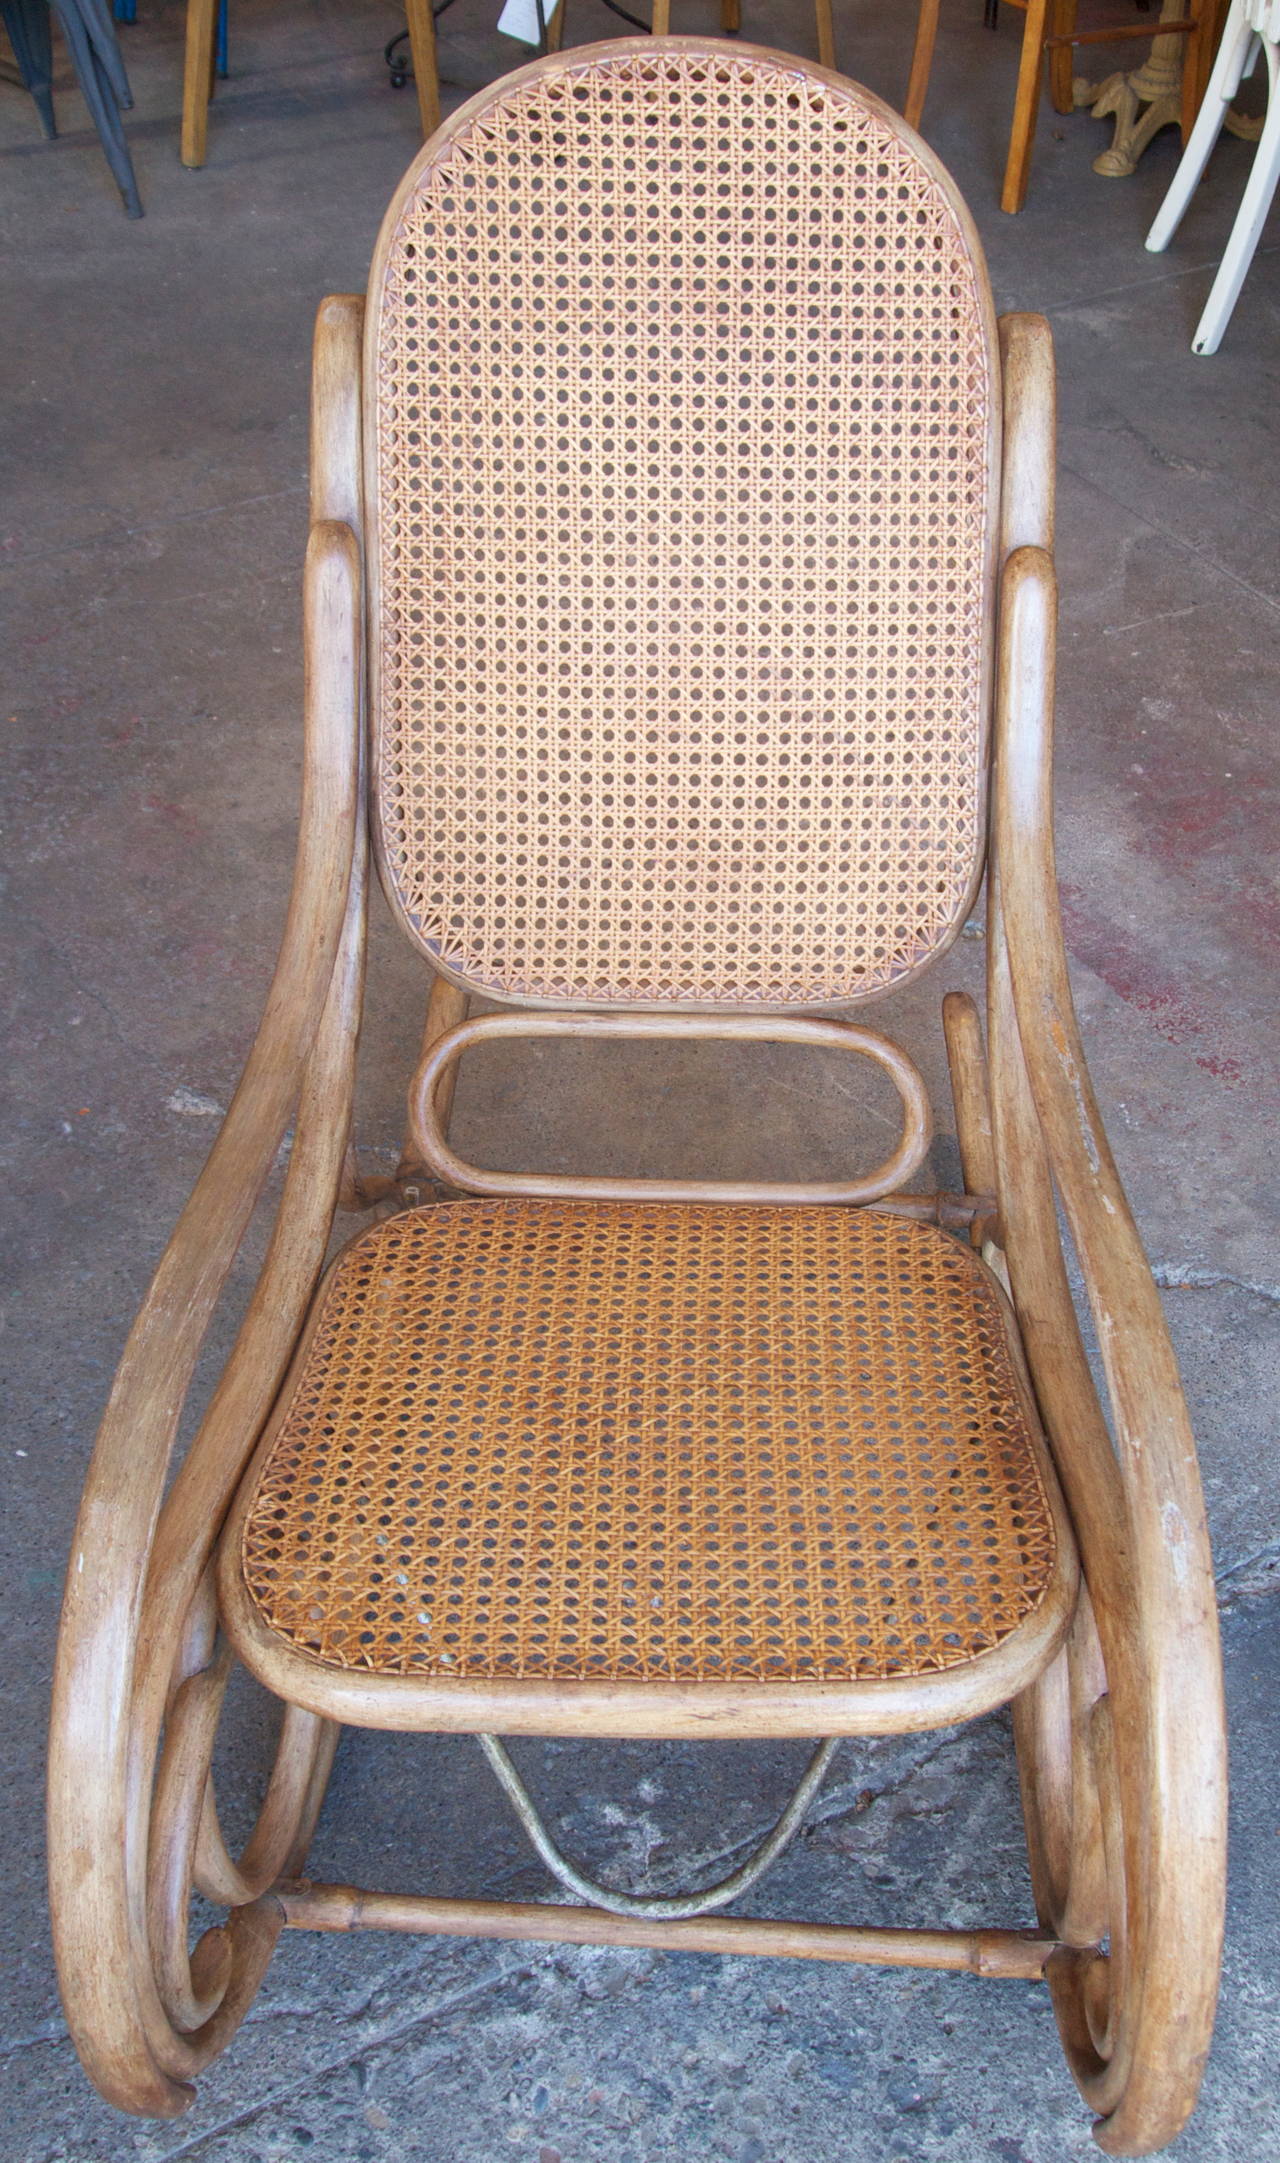 Rocking bentwood and caned chair by Thonet with original finish, circa 1900.